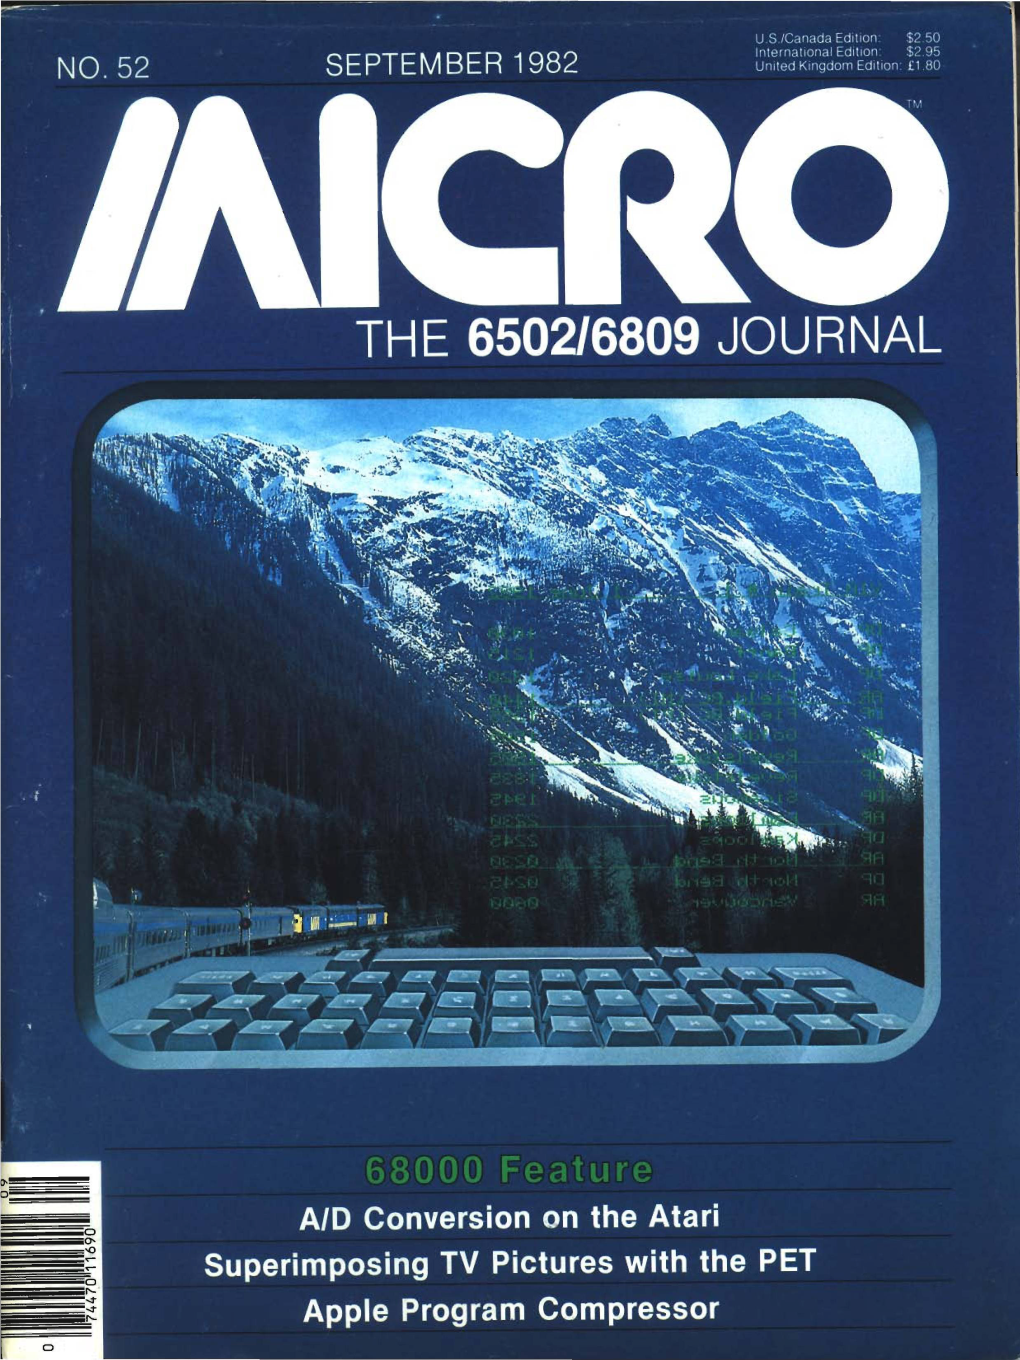 The 6502/6809 Journal No